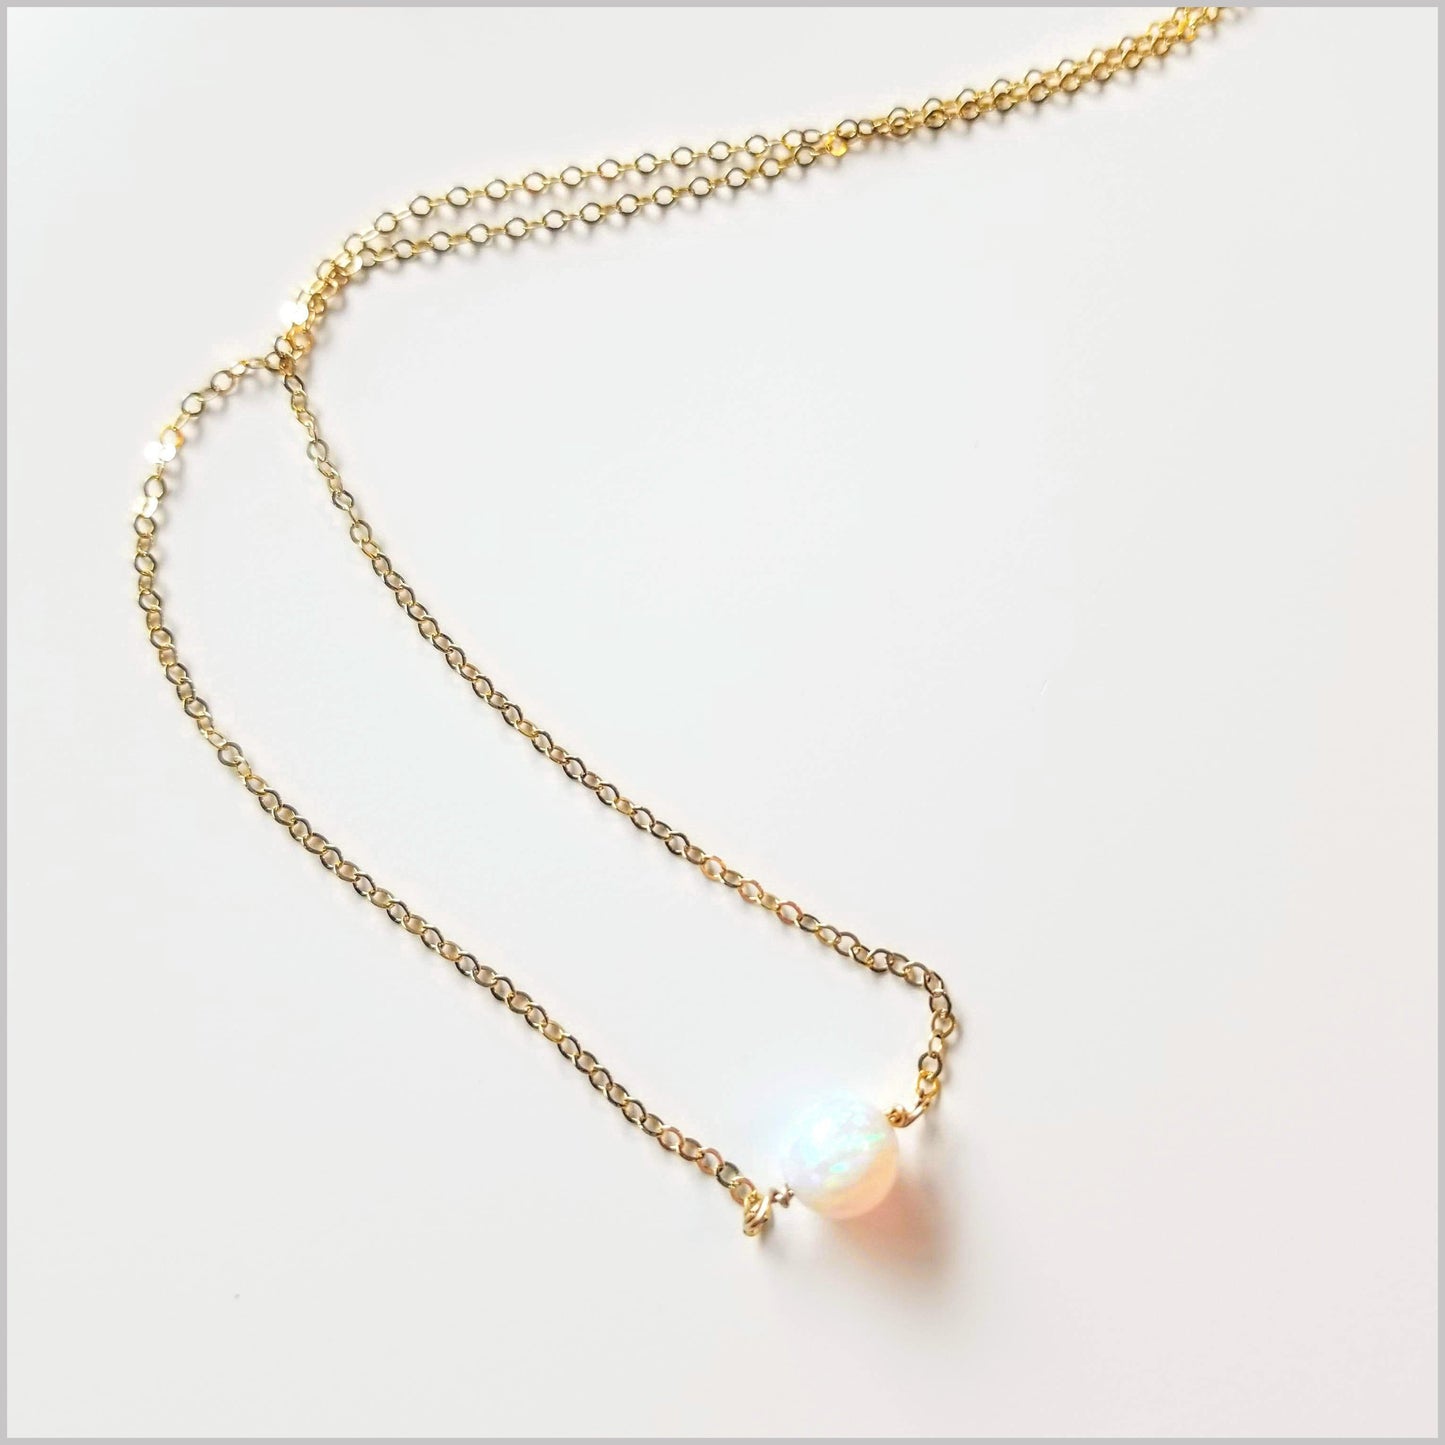 Fire Opal Round Bead Necklace